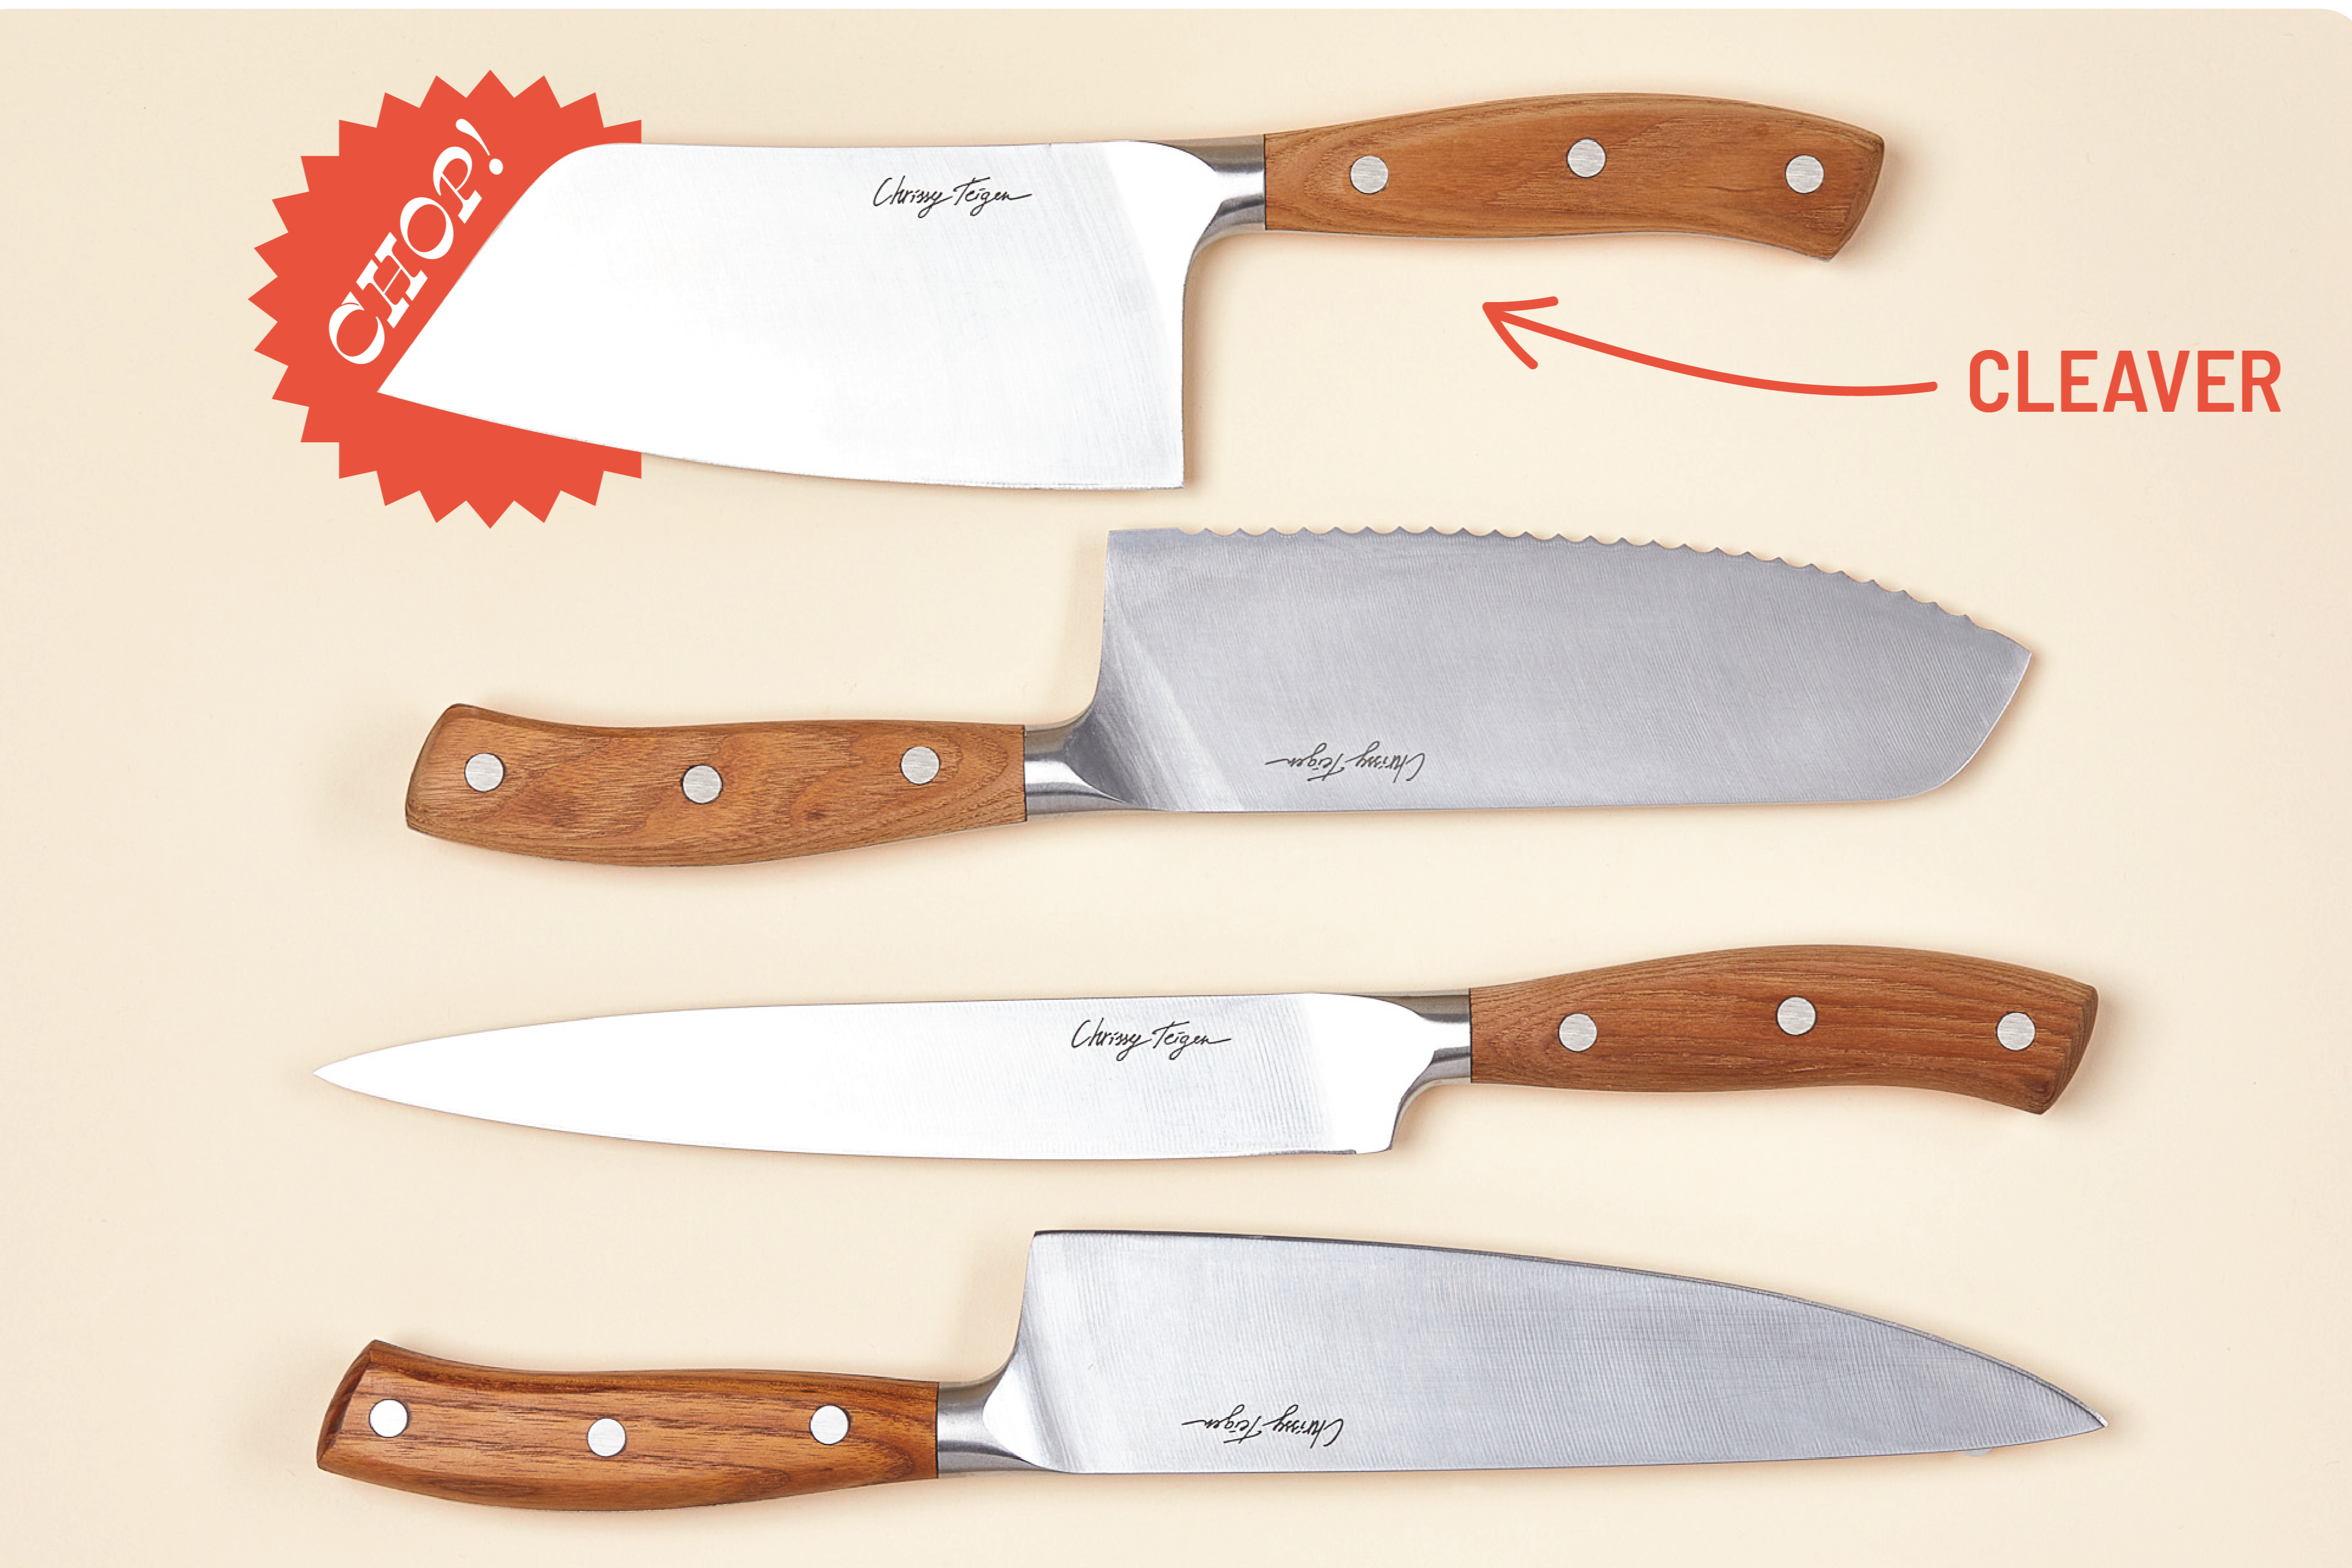 A Cleaver Should Be Your New Go-To Knife—Here’s How to Use It